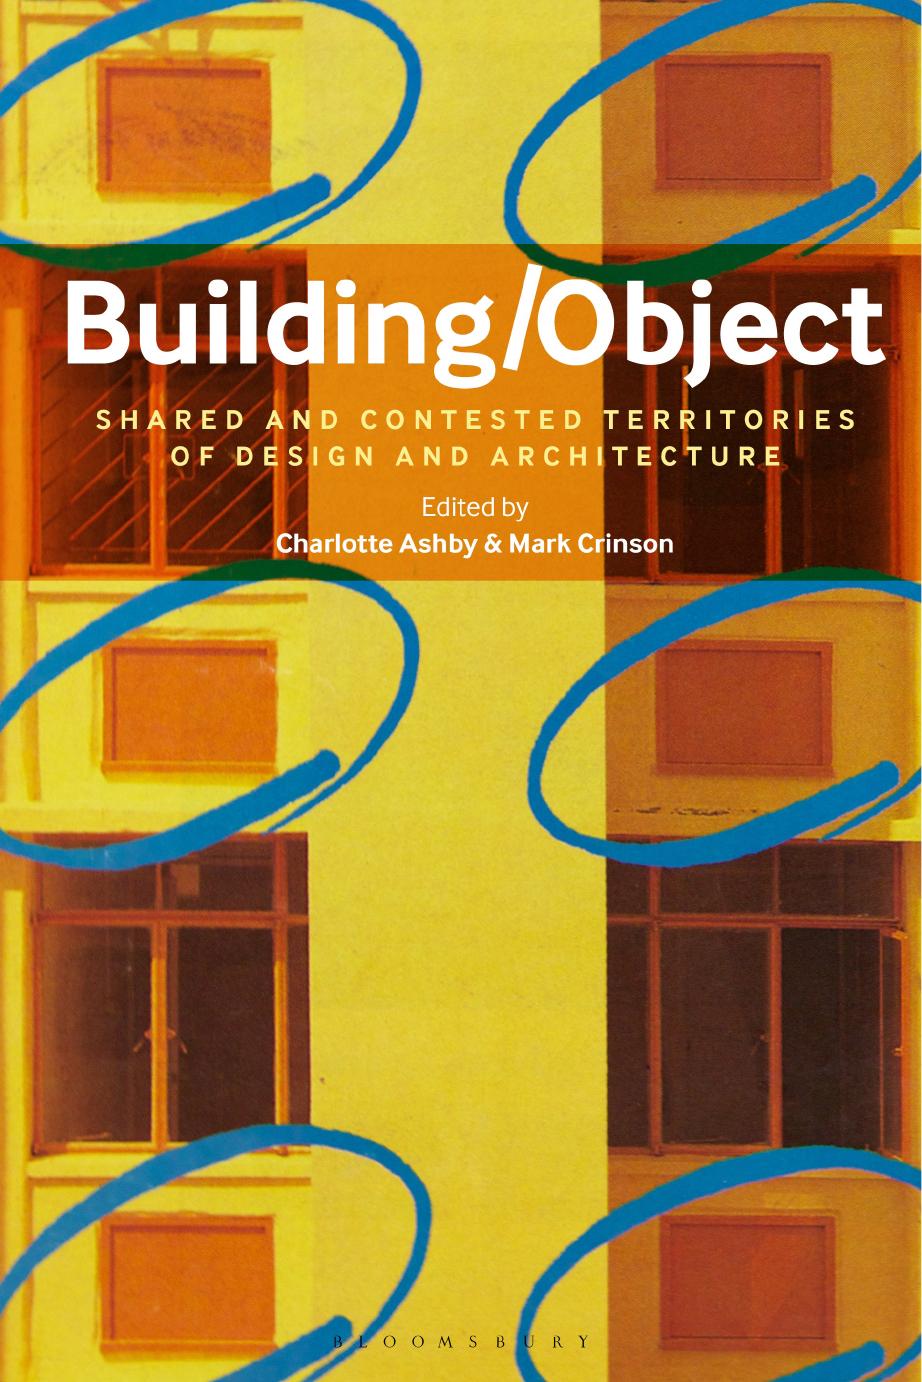 Building/Object: Shared and Contested Territories of Design and Architecture by Charlotte Ashby; Mark Crinson (editors)